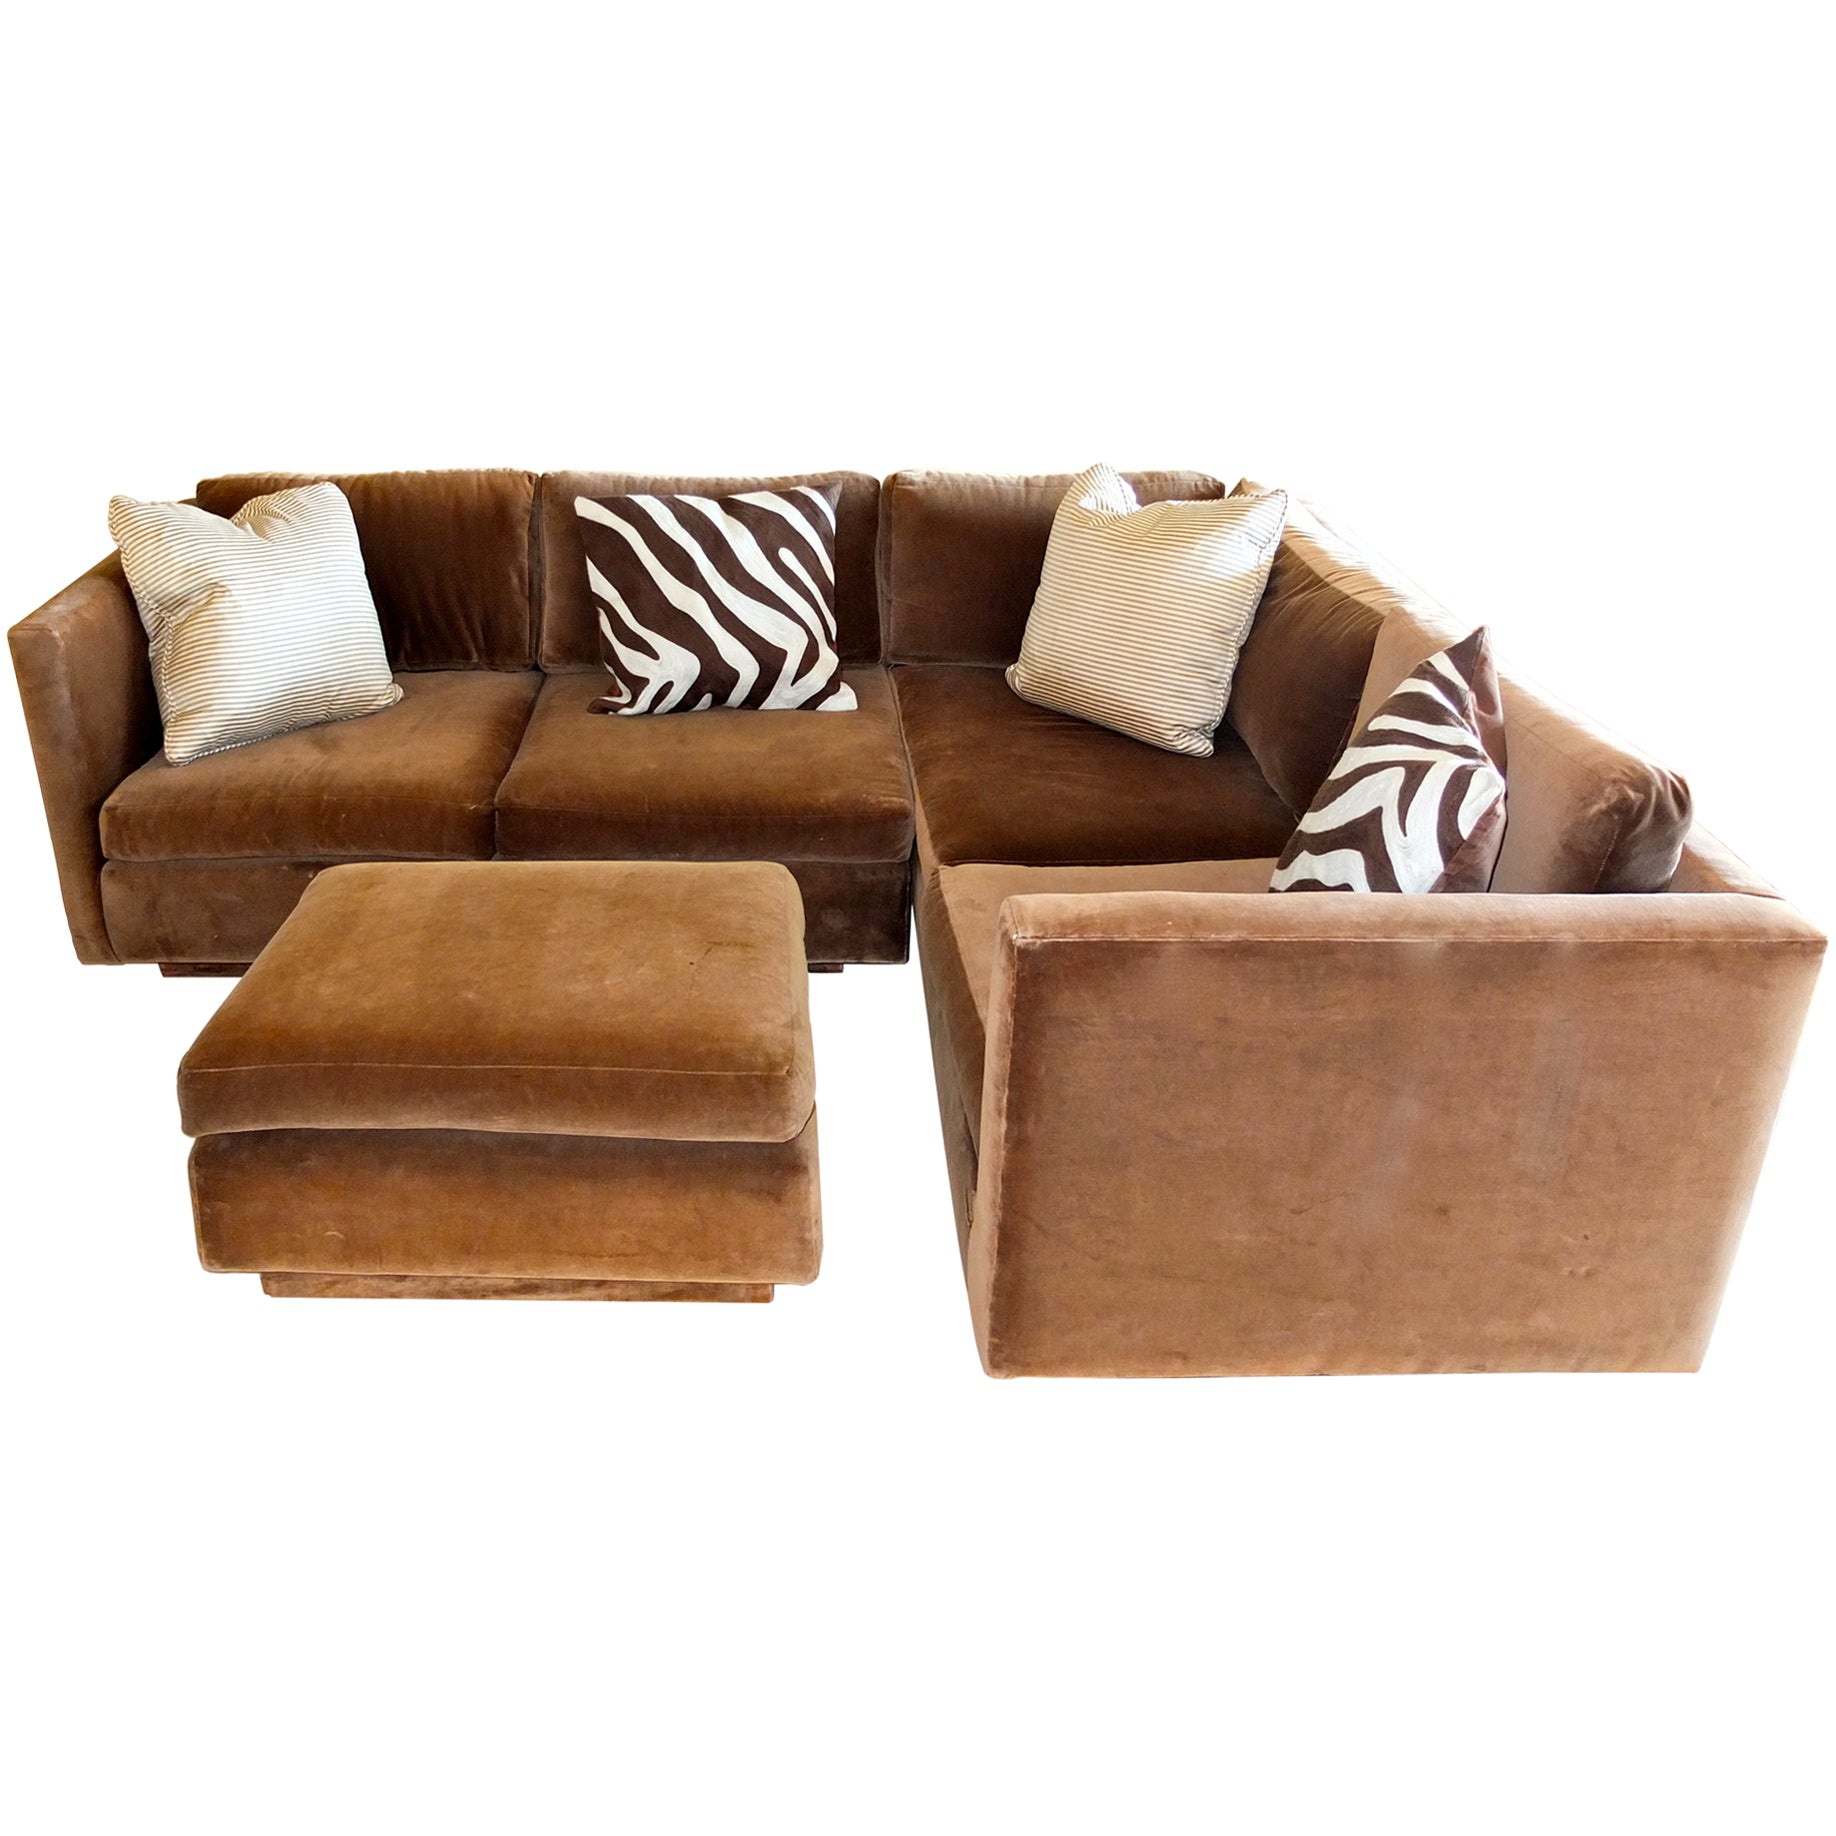 Vintage L Shaped Sectional Sofa with Ottoman